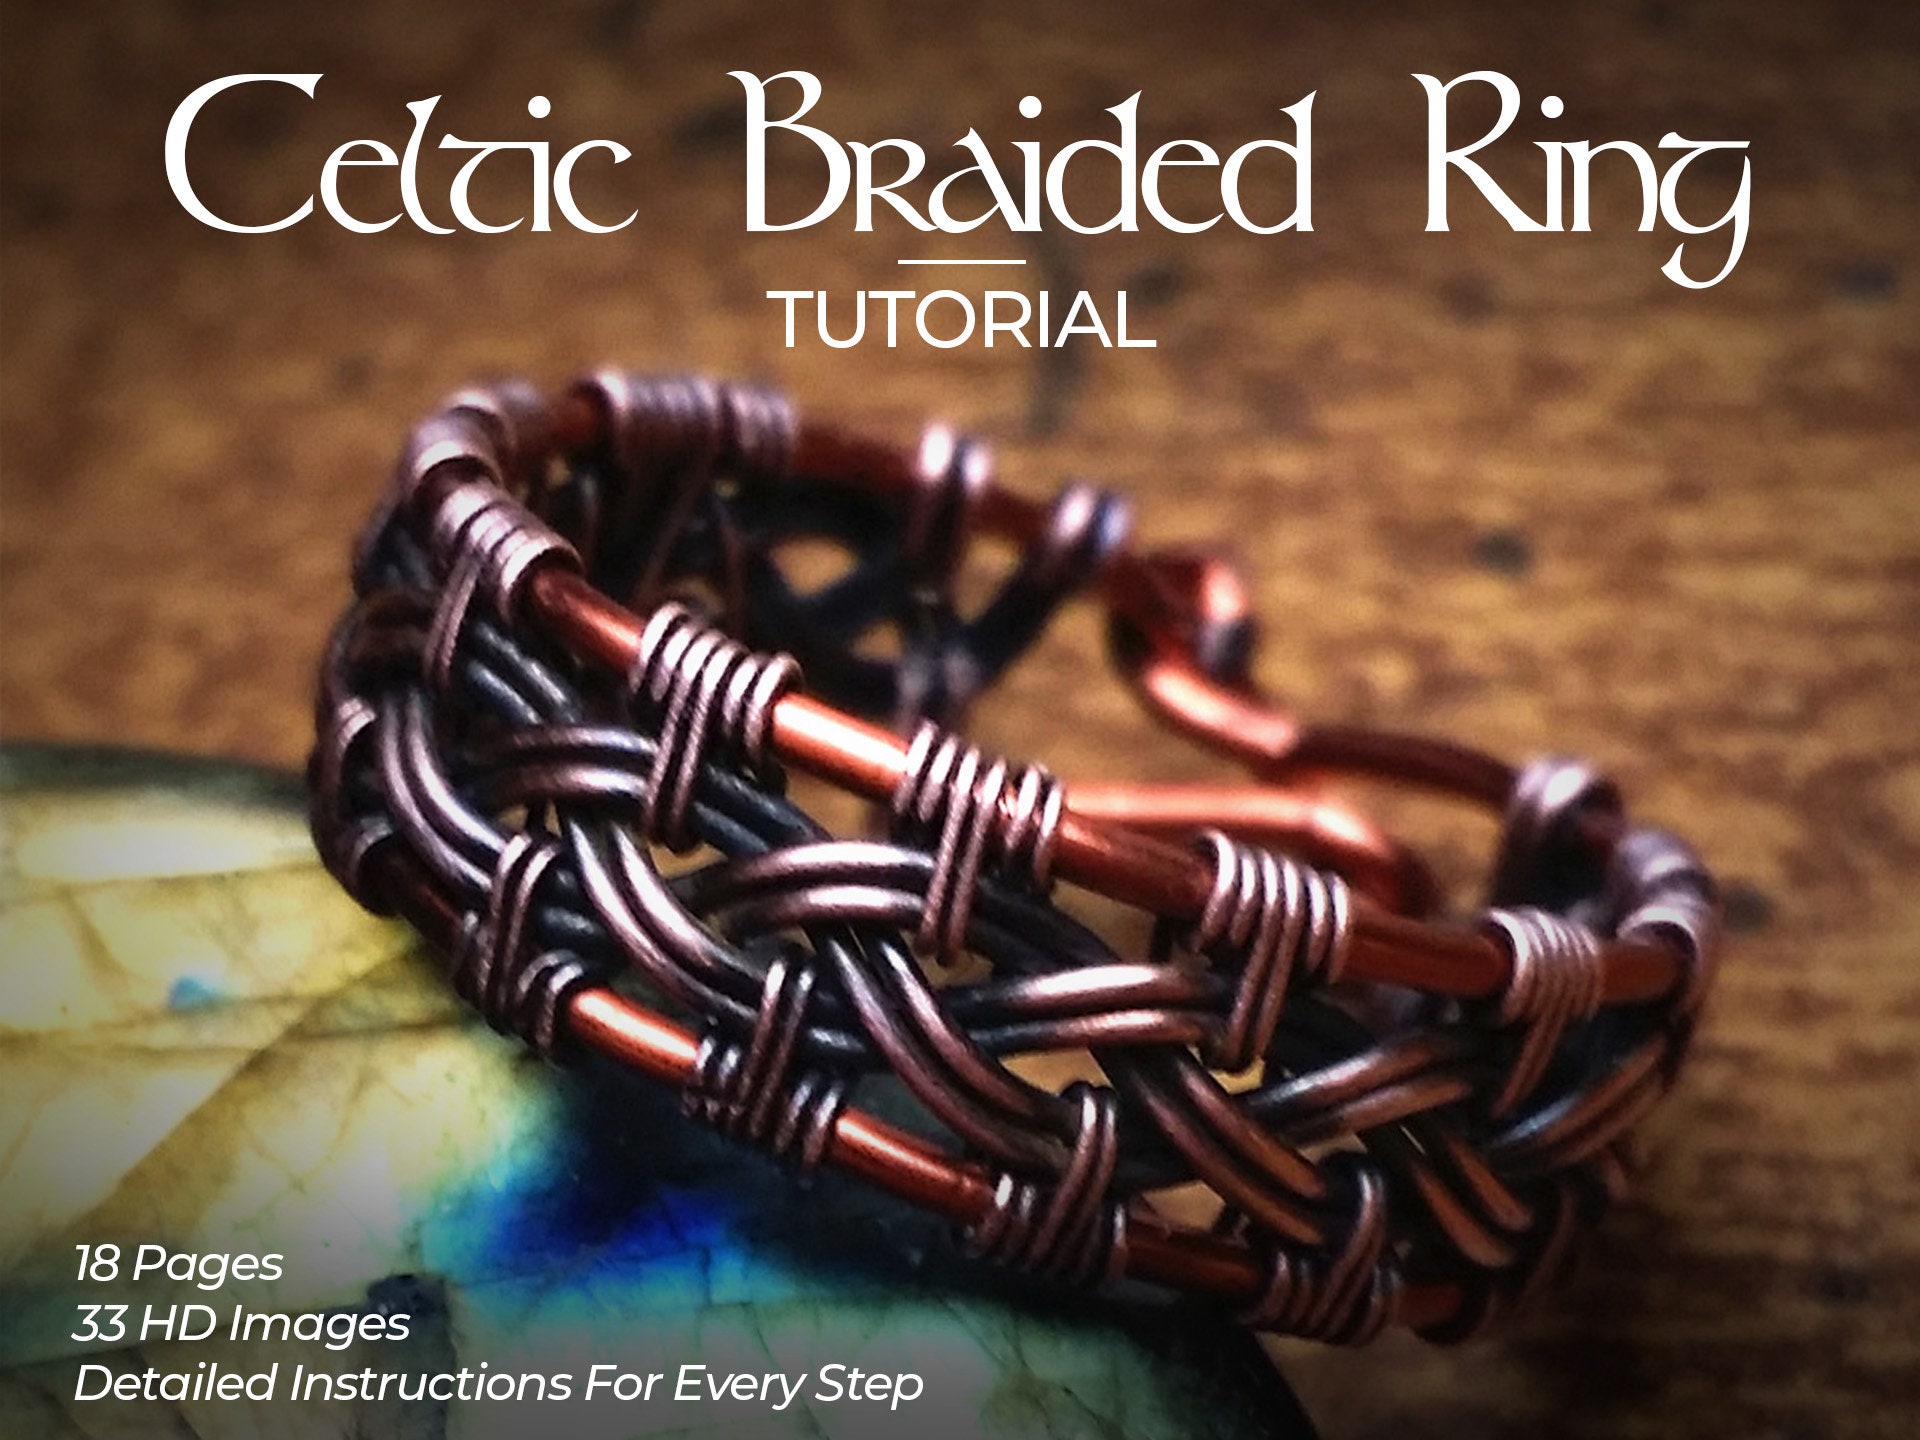 93 Best wire wrapping tools ideas  jewelry tutorials, wire wrapping tools,  jewelry making